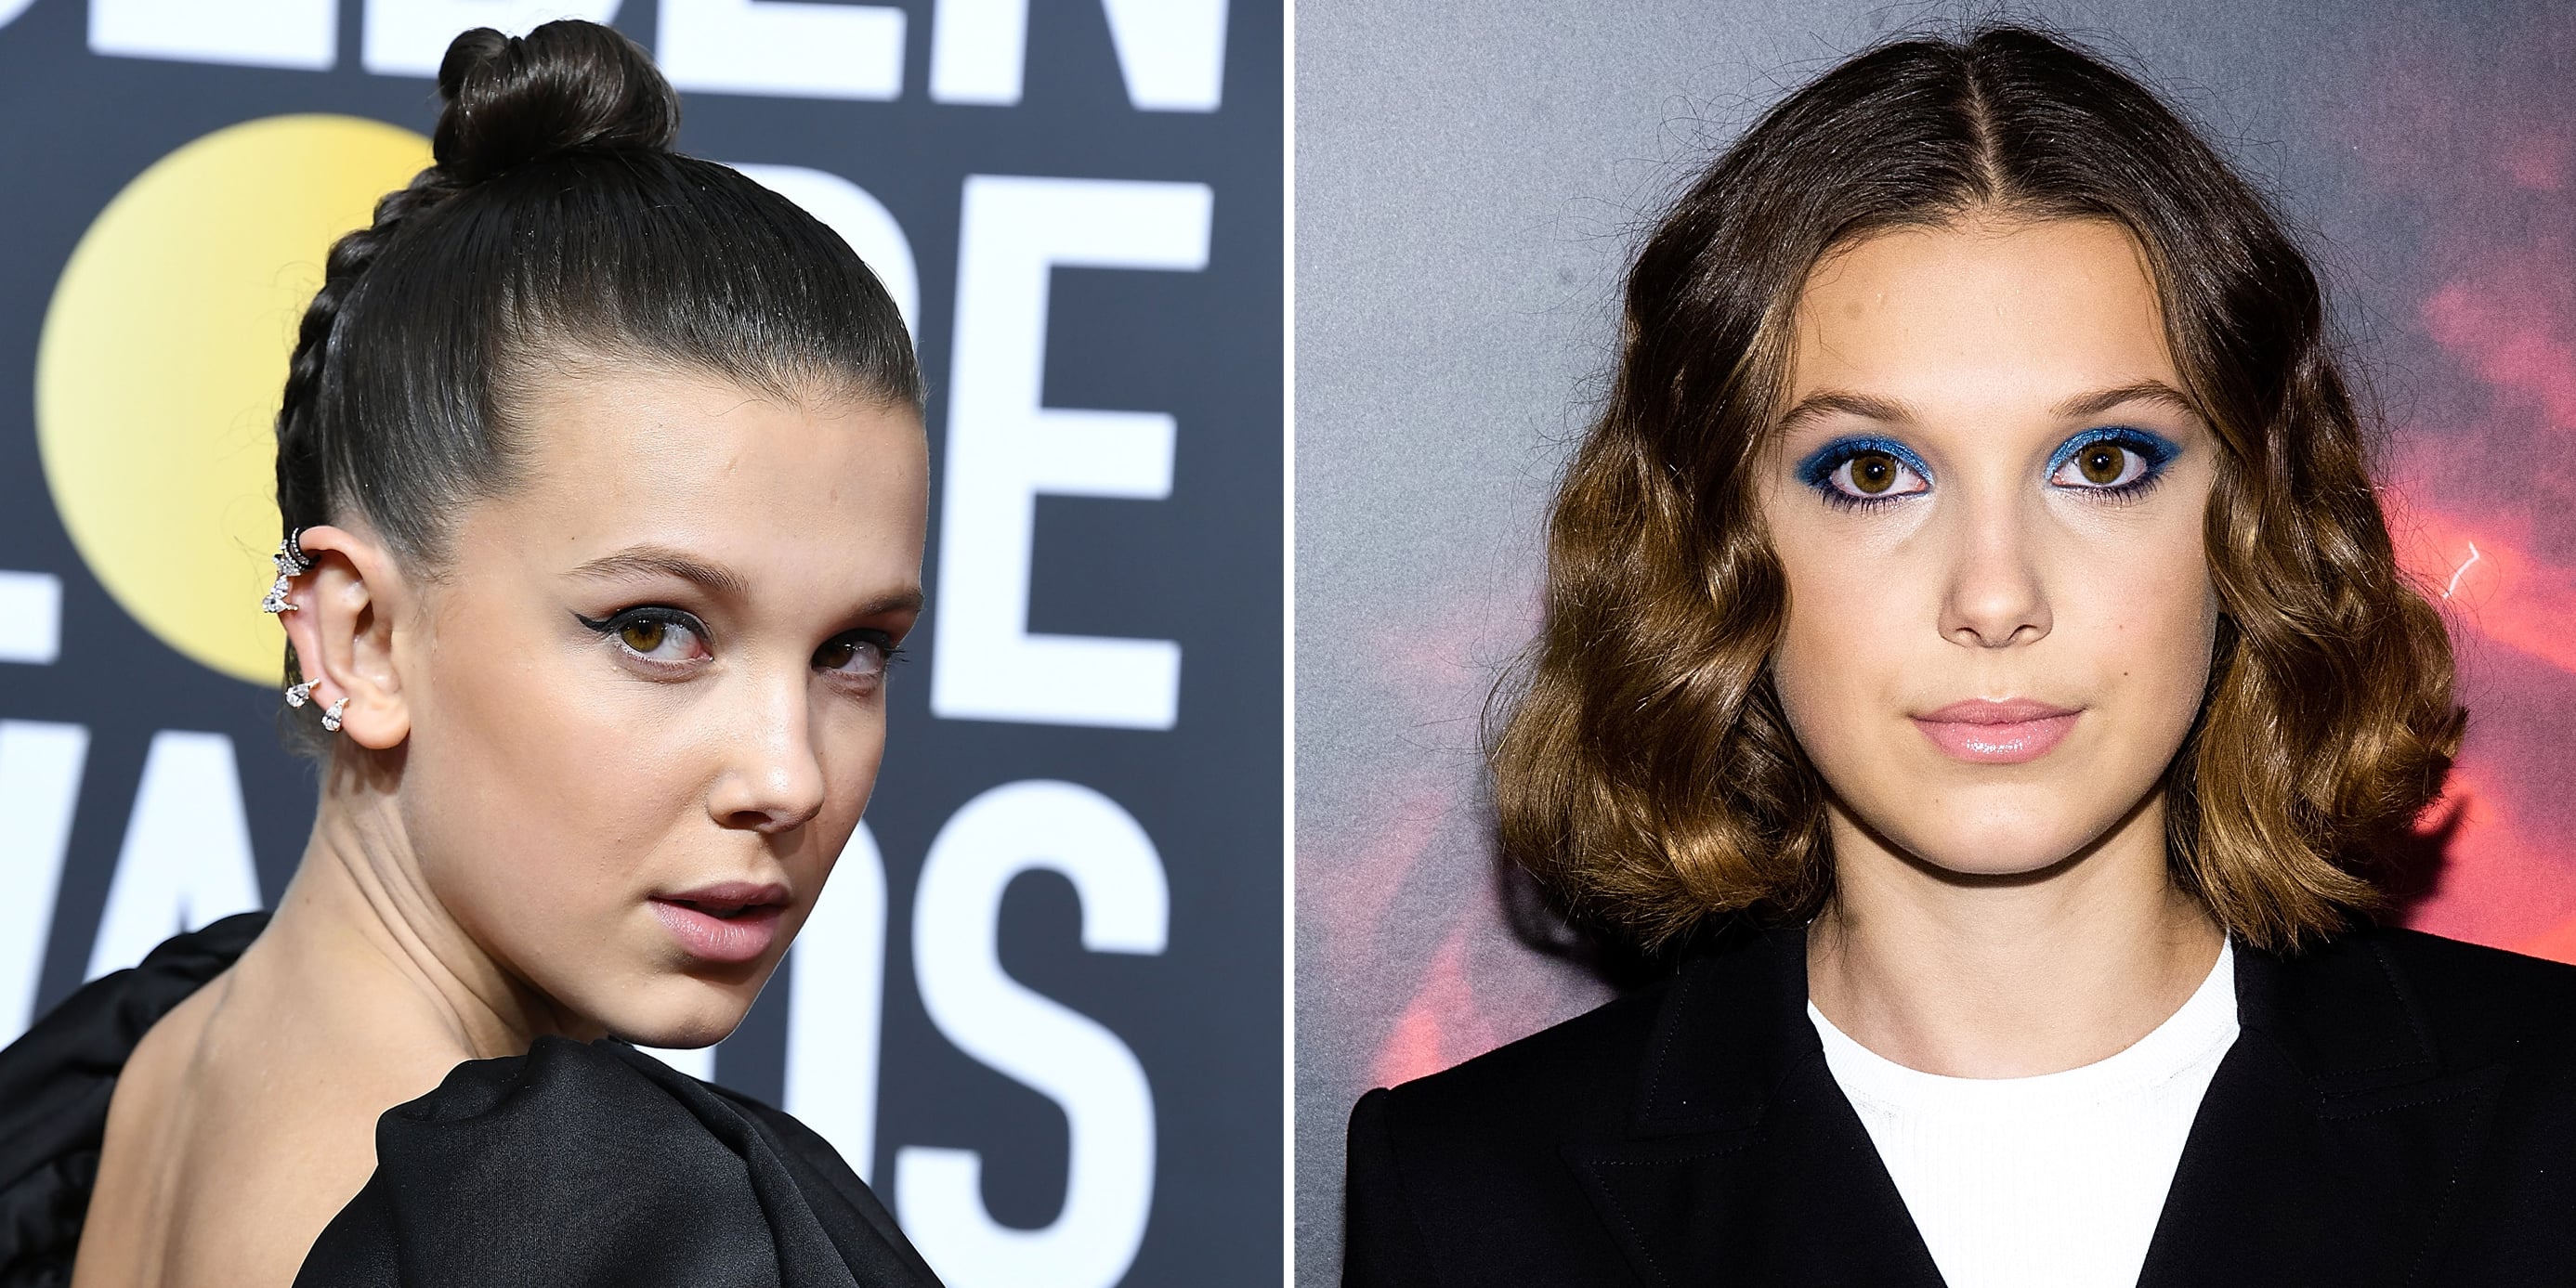 Millie Bobby Brown's Best Hair and Makeup Looks | POPSUGAR Beauty